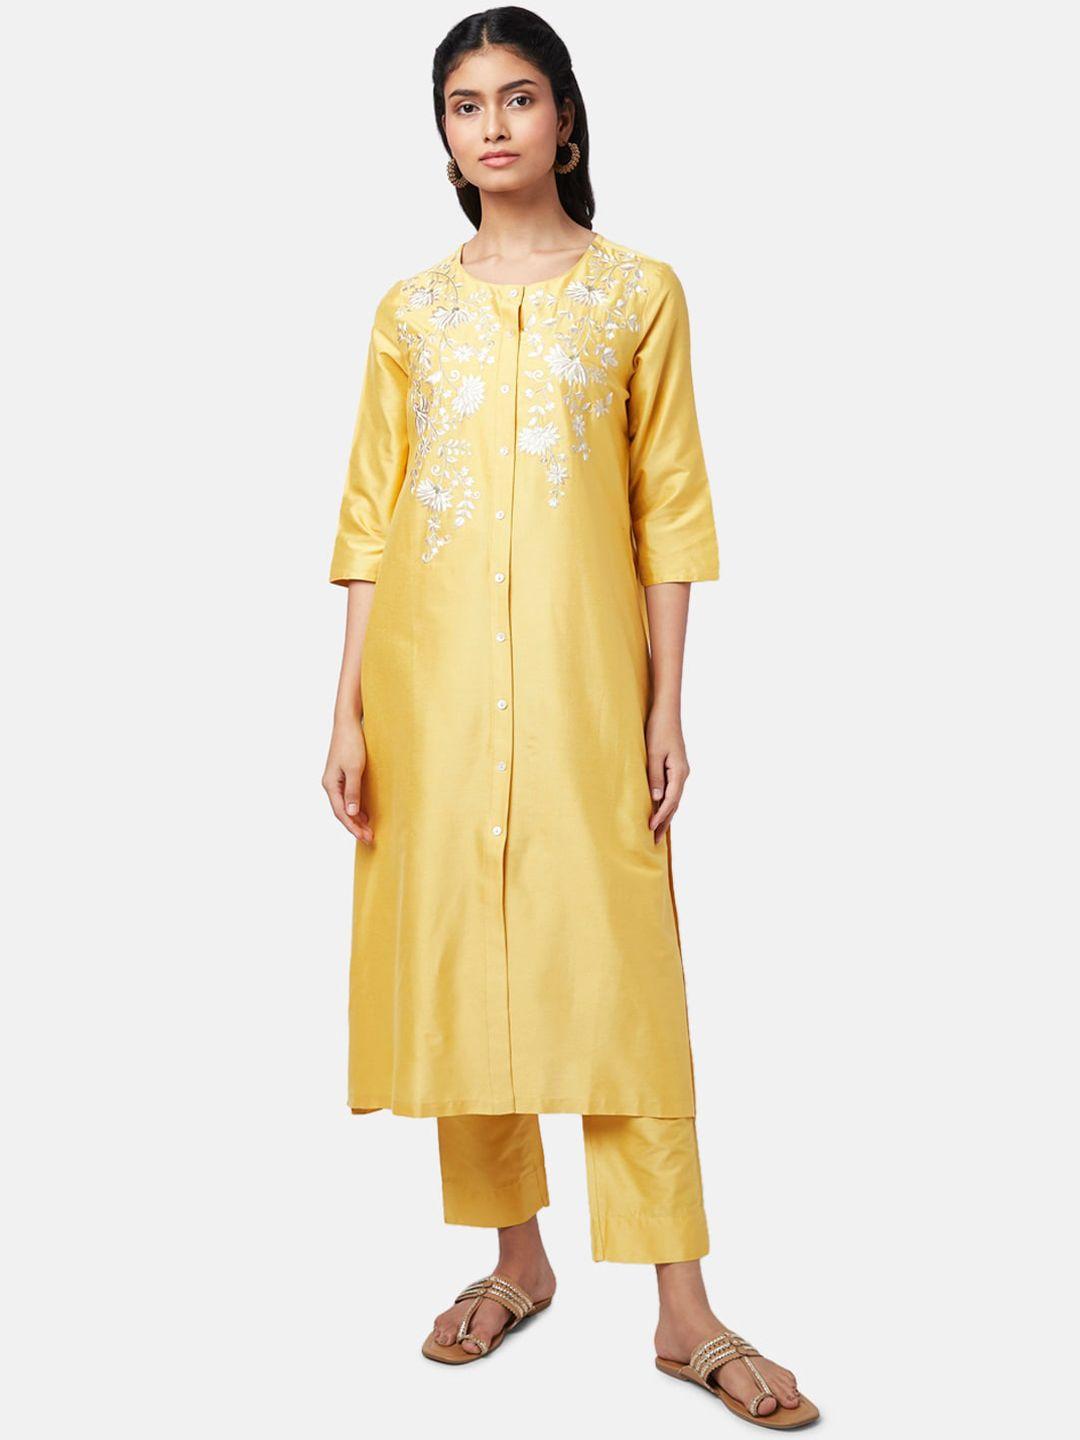 rangmanch-by-pantaloons-floral-embroidered-round-neck-kurta-with-trousers-&-dupatta